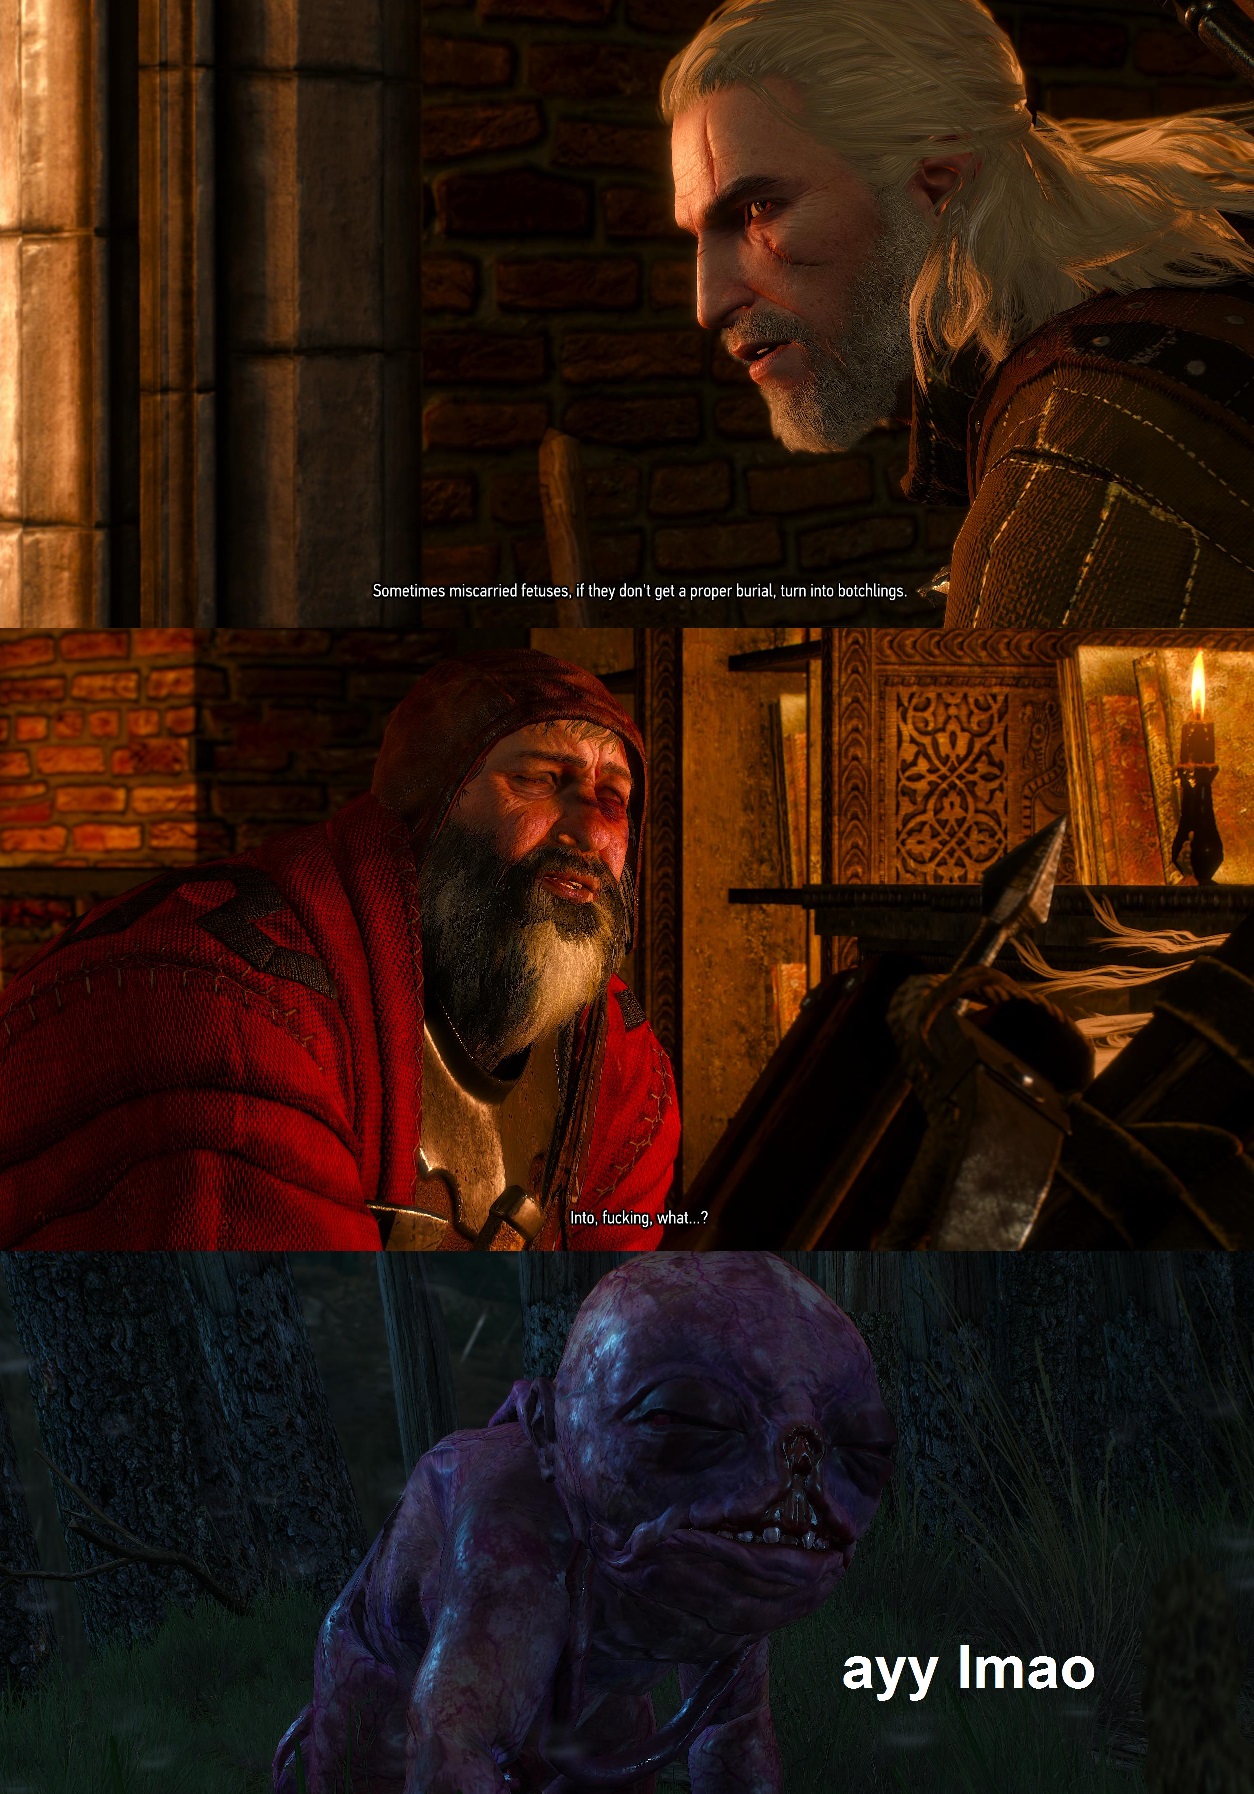 The world of The Witcher is a messed up place...